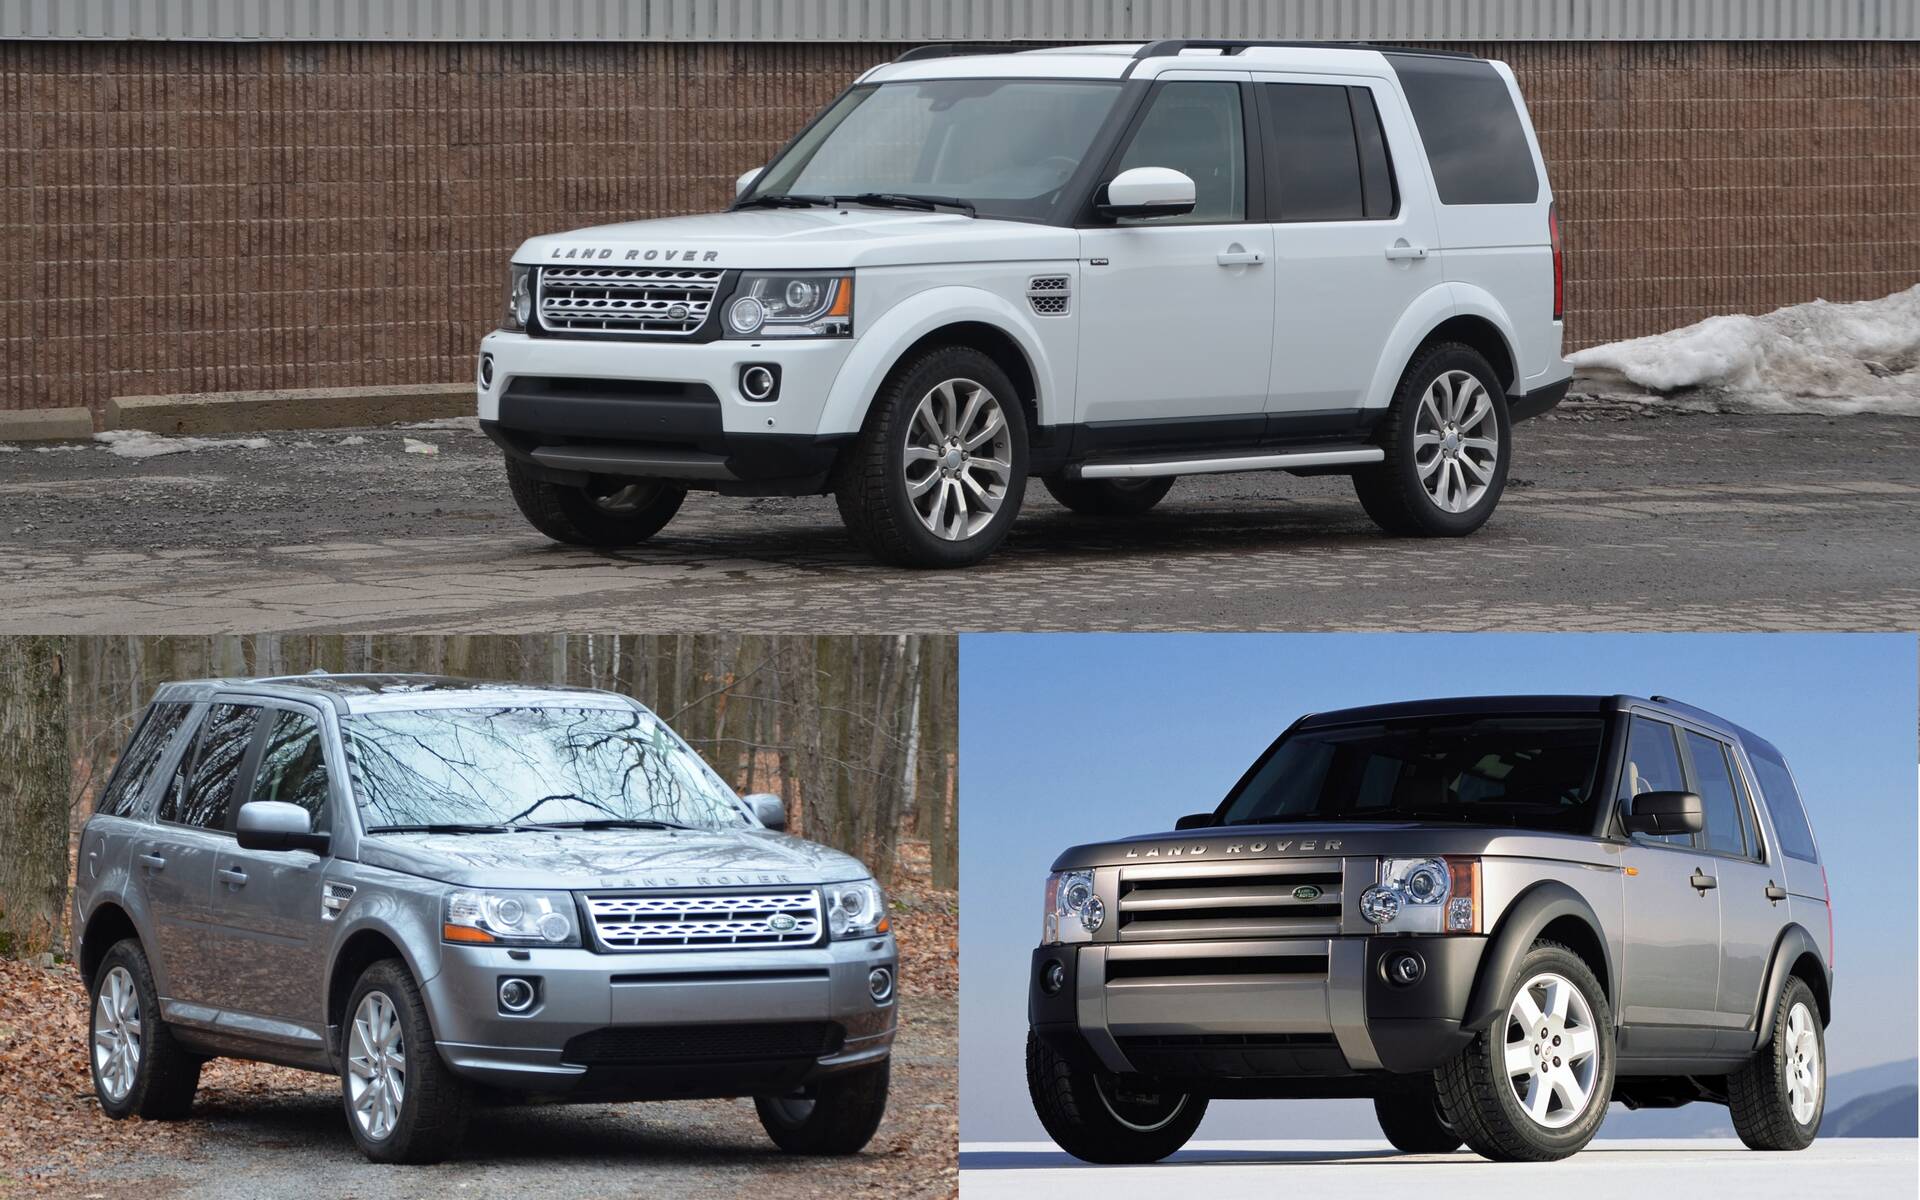 Land Rover LR2, LR3 or LR4: What's the Difference?